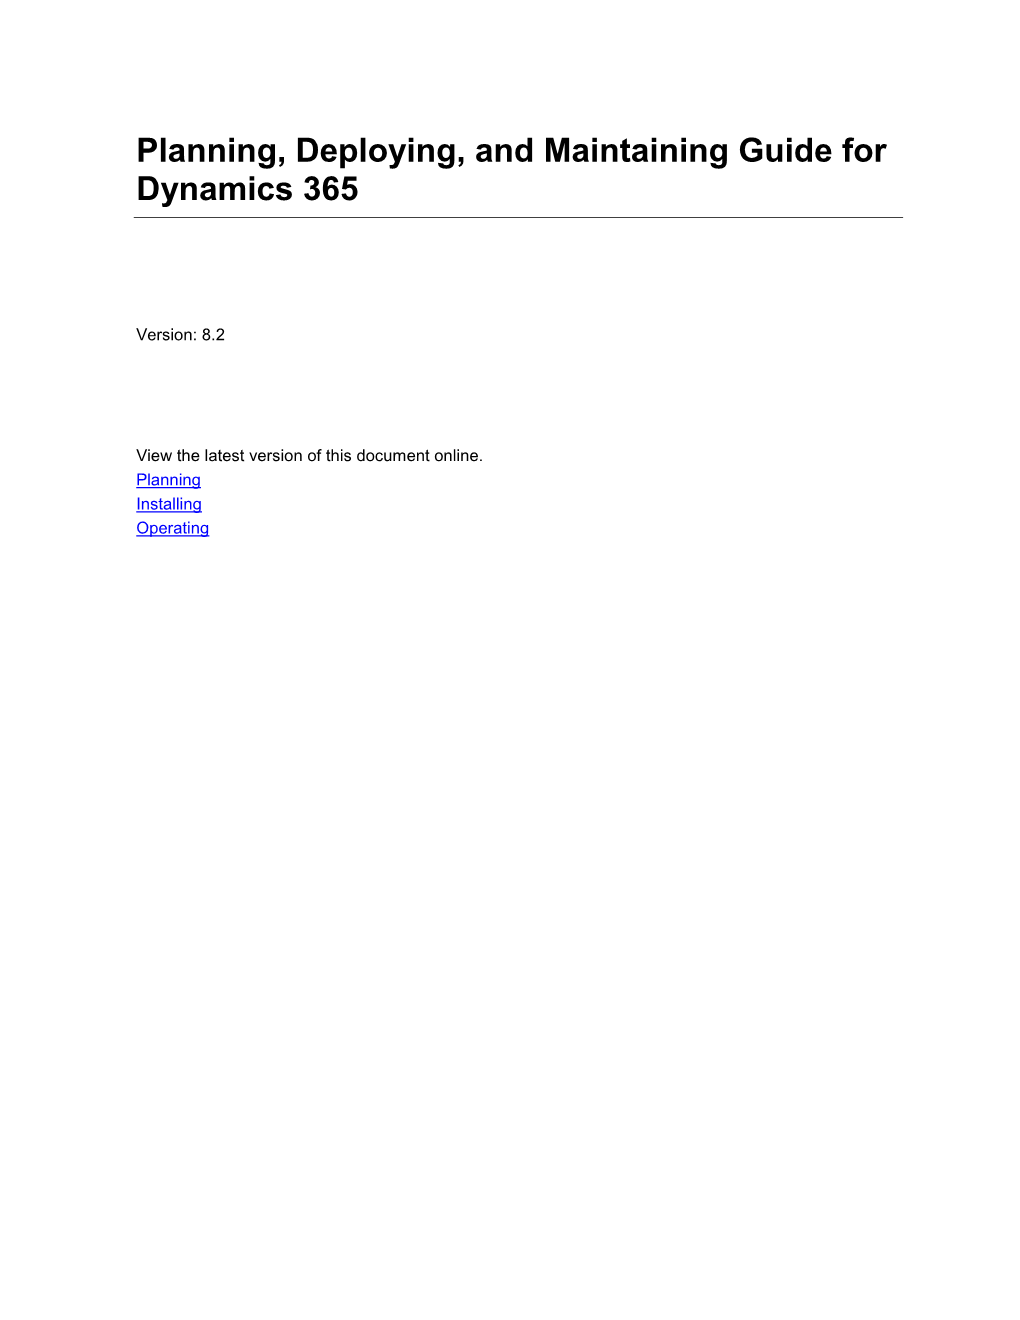 Planning, Deploying, and Maintaining Guide for Dynamics 365